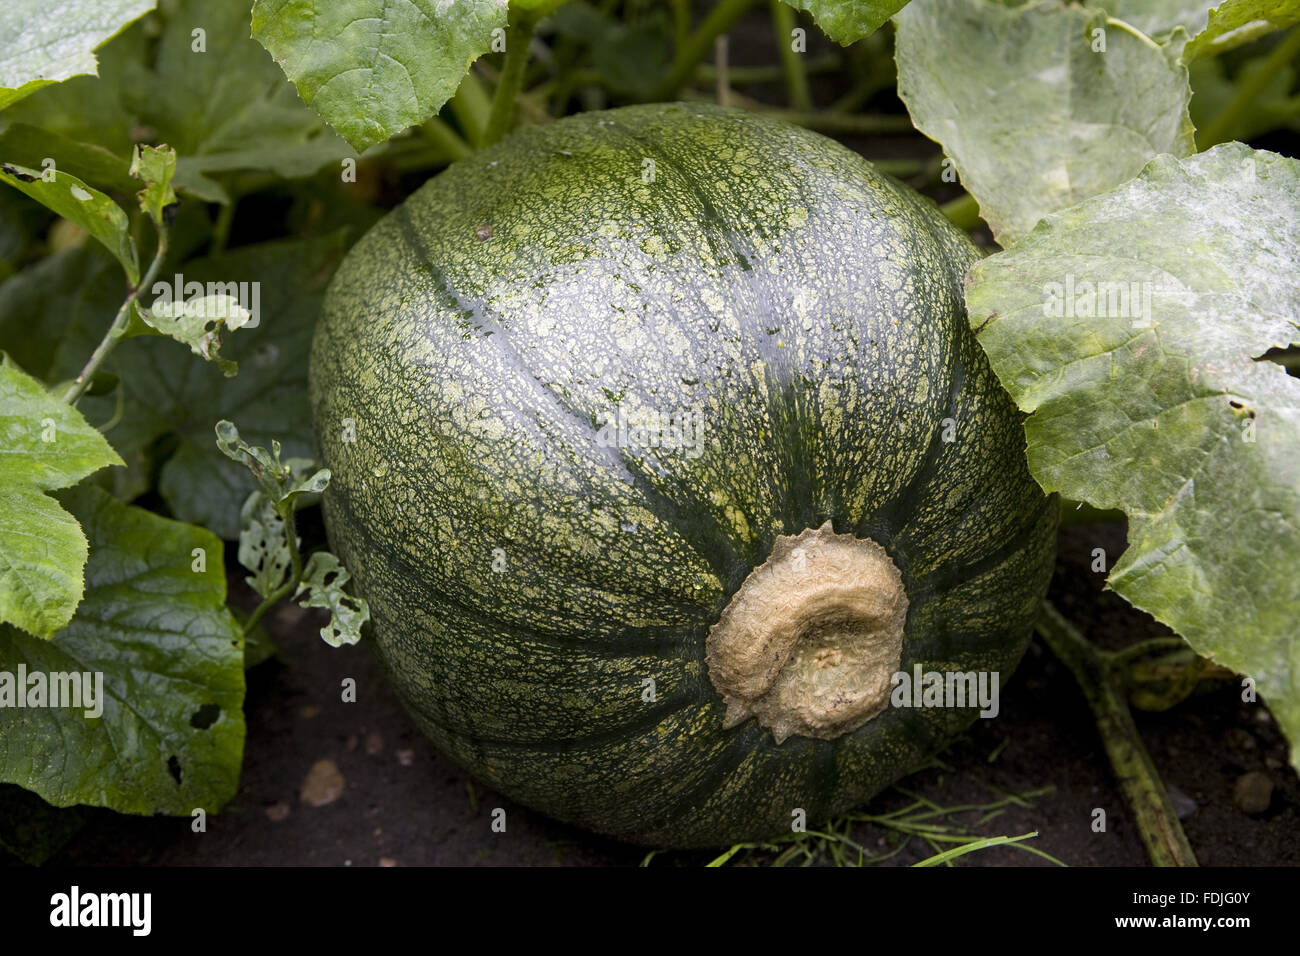 Squash grown in the Walled Kitchen Garden in September at Clumber Park, Nottinghamshire. Stock Photo